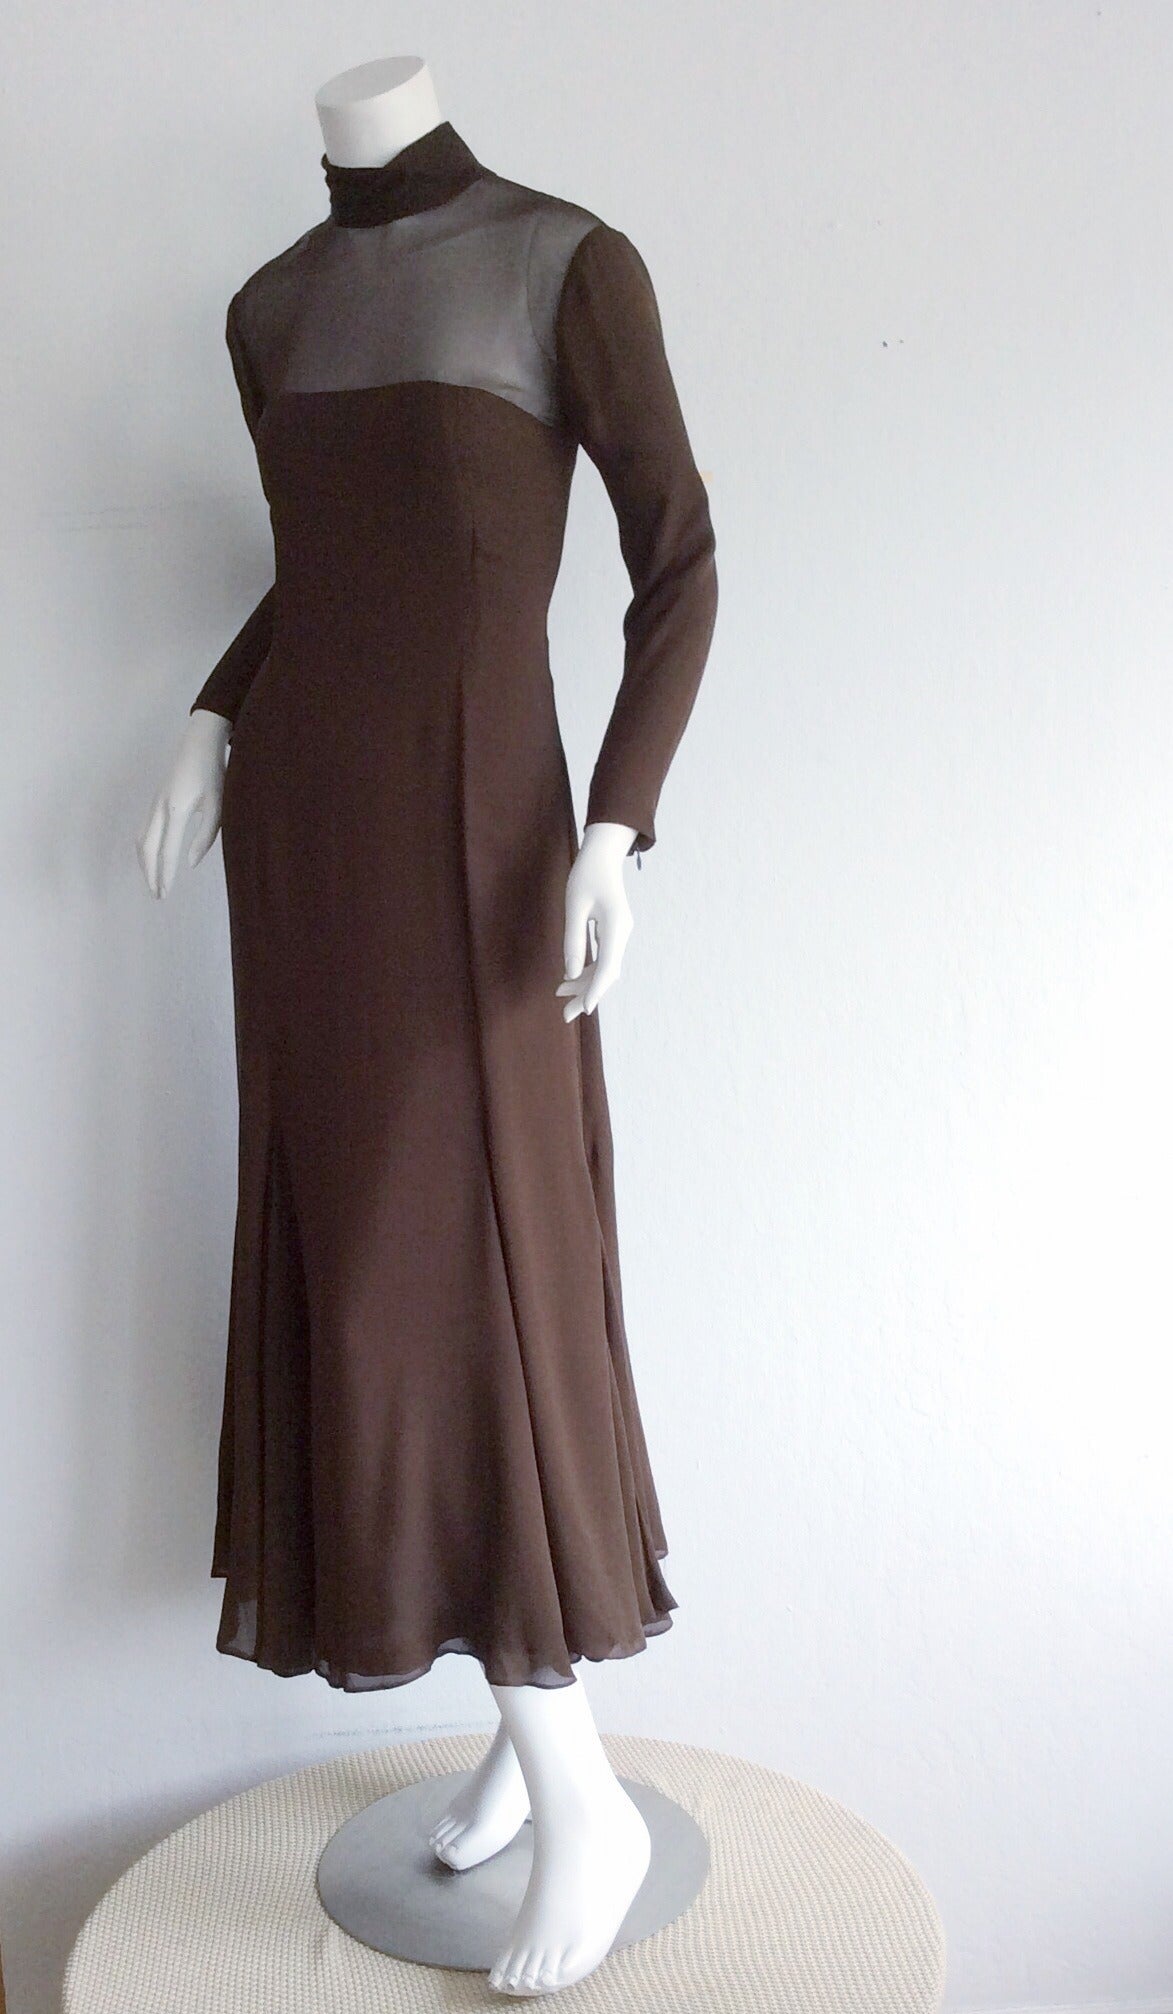 Exquisite vintage brown chiffon Nolan Miller Couture dress! Layers of wonderful chocolate brown chiffon, that look amazing with movement! Semi-sheer upper bodice, and arms, with a peek-a-boo in back. Perfect midi length! In great condition.